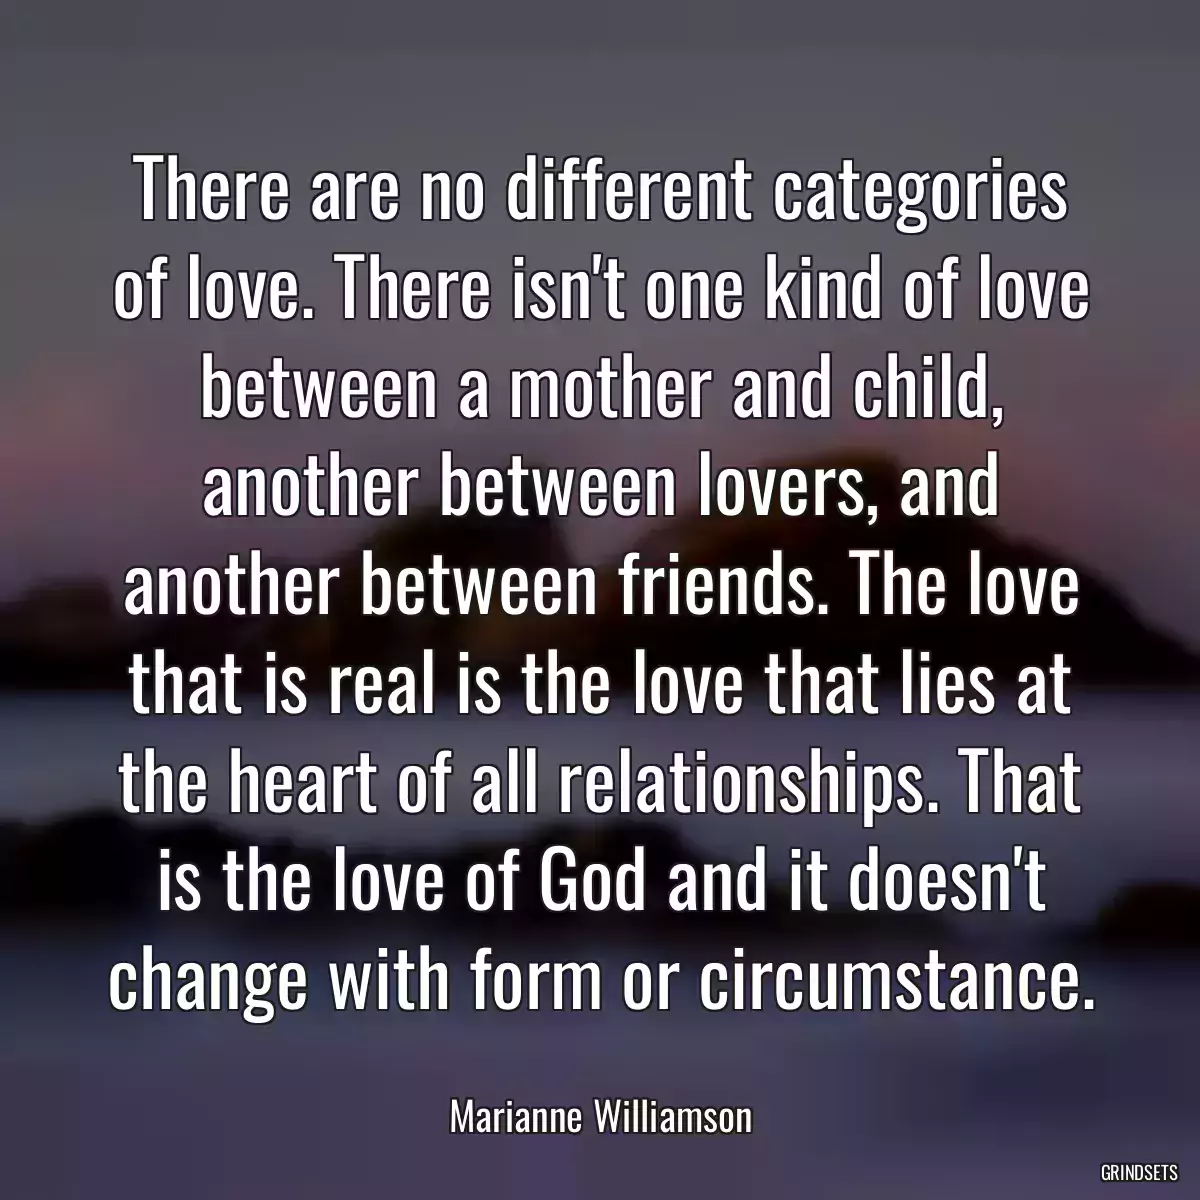 There are no different categories of love. There isn\'t one kind of love between a mother and child, another between lovers, and another between friends. The love that is real is the love that lies at the heart of all relationships. That is the love of God and it doesn\'t change with form or circumstance.